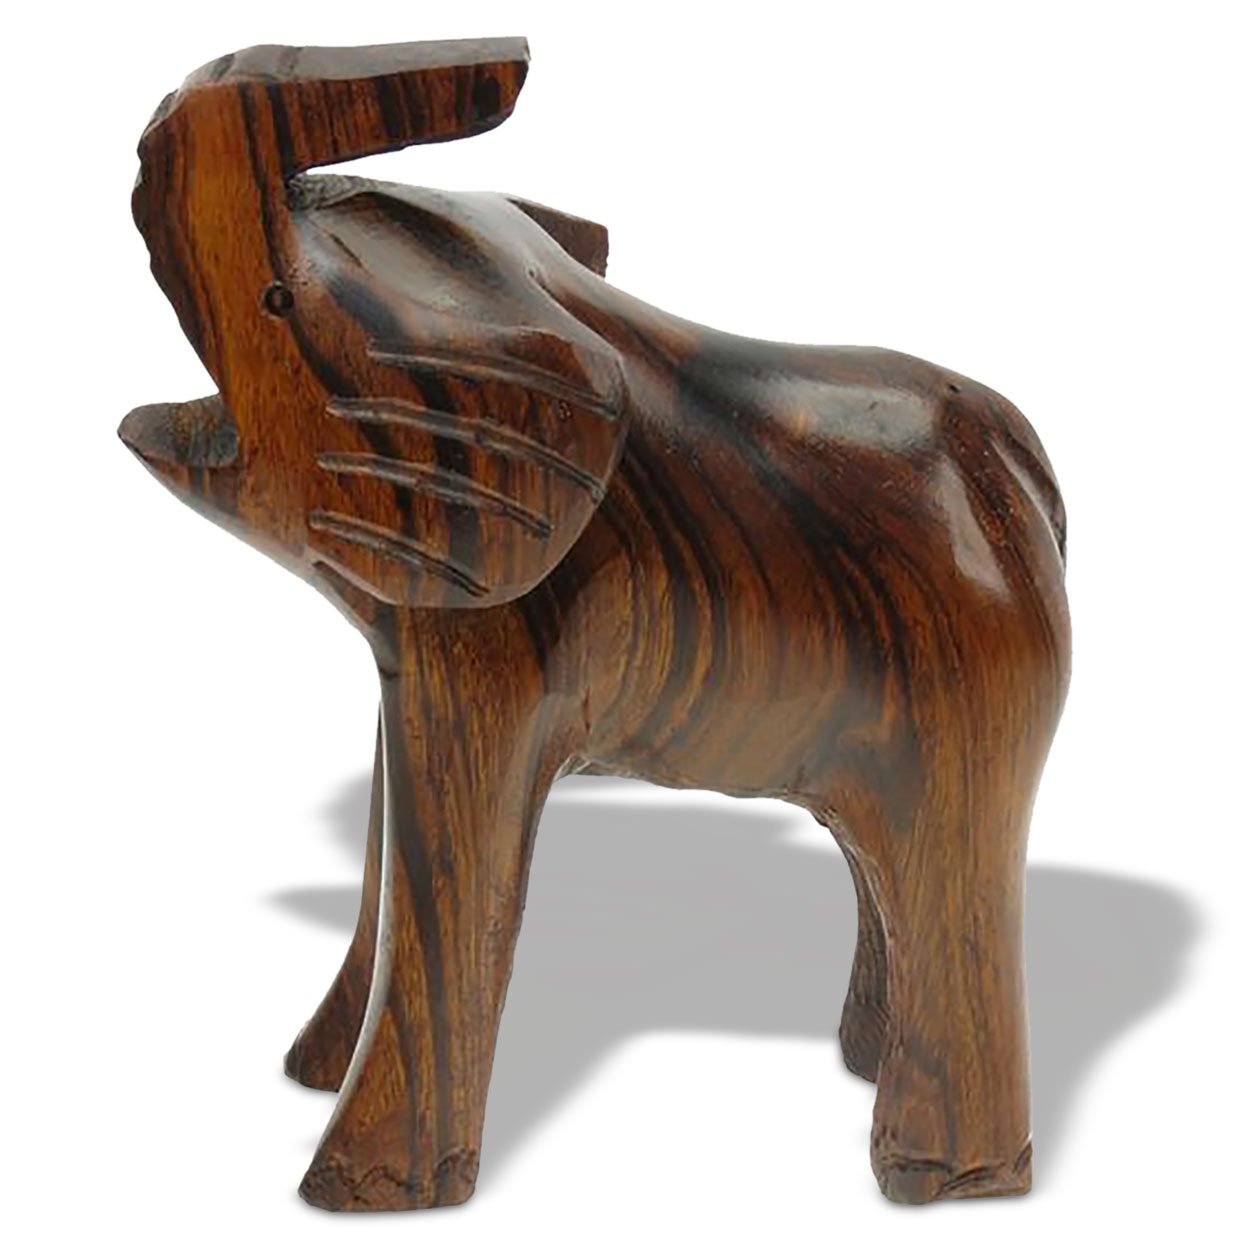 172217 - 5in Tall Elephant Hand-Carved in Ironwood